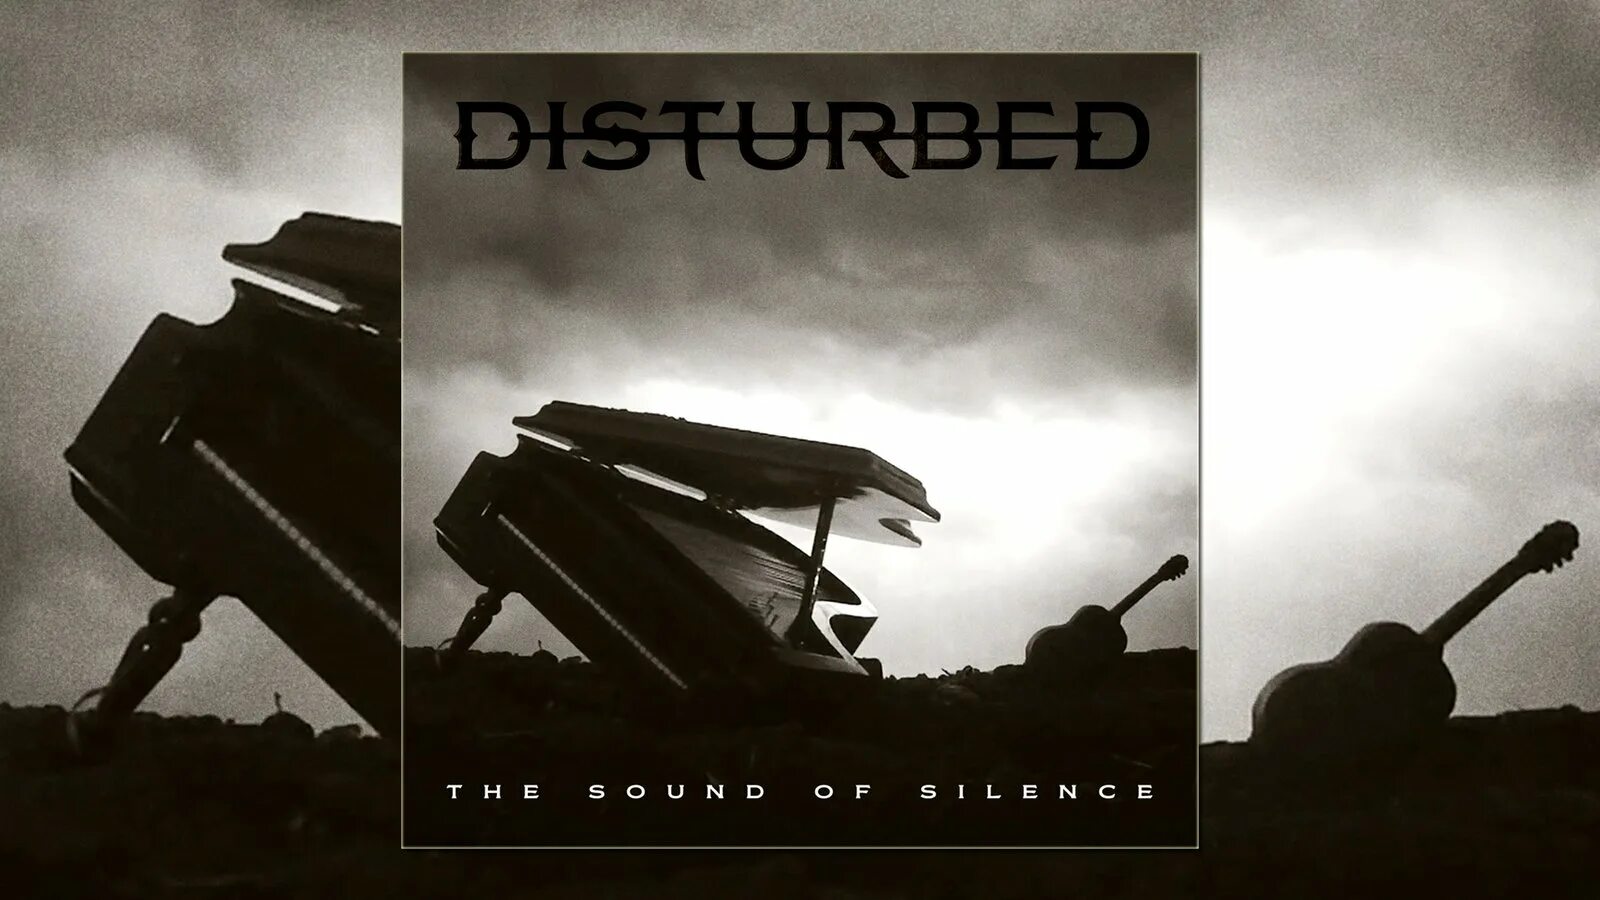 Disturbed the sound of silence текст. Disturbed the Sound of Silence. Дэвид Дрейман the Sound of Silence. The Sound of Silence Автор. Disturbed the Sound of.